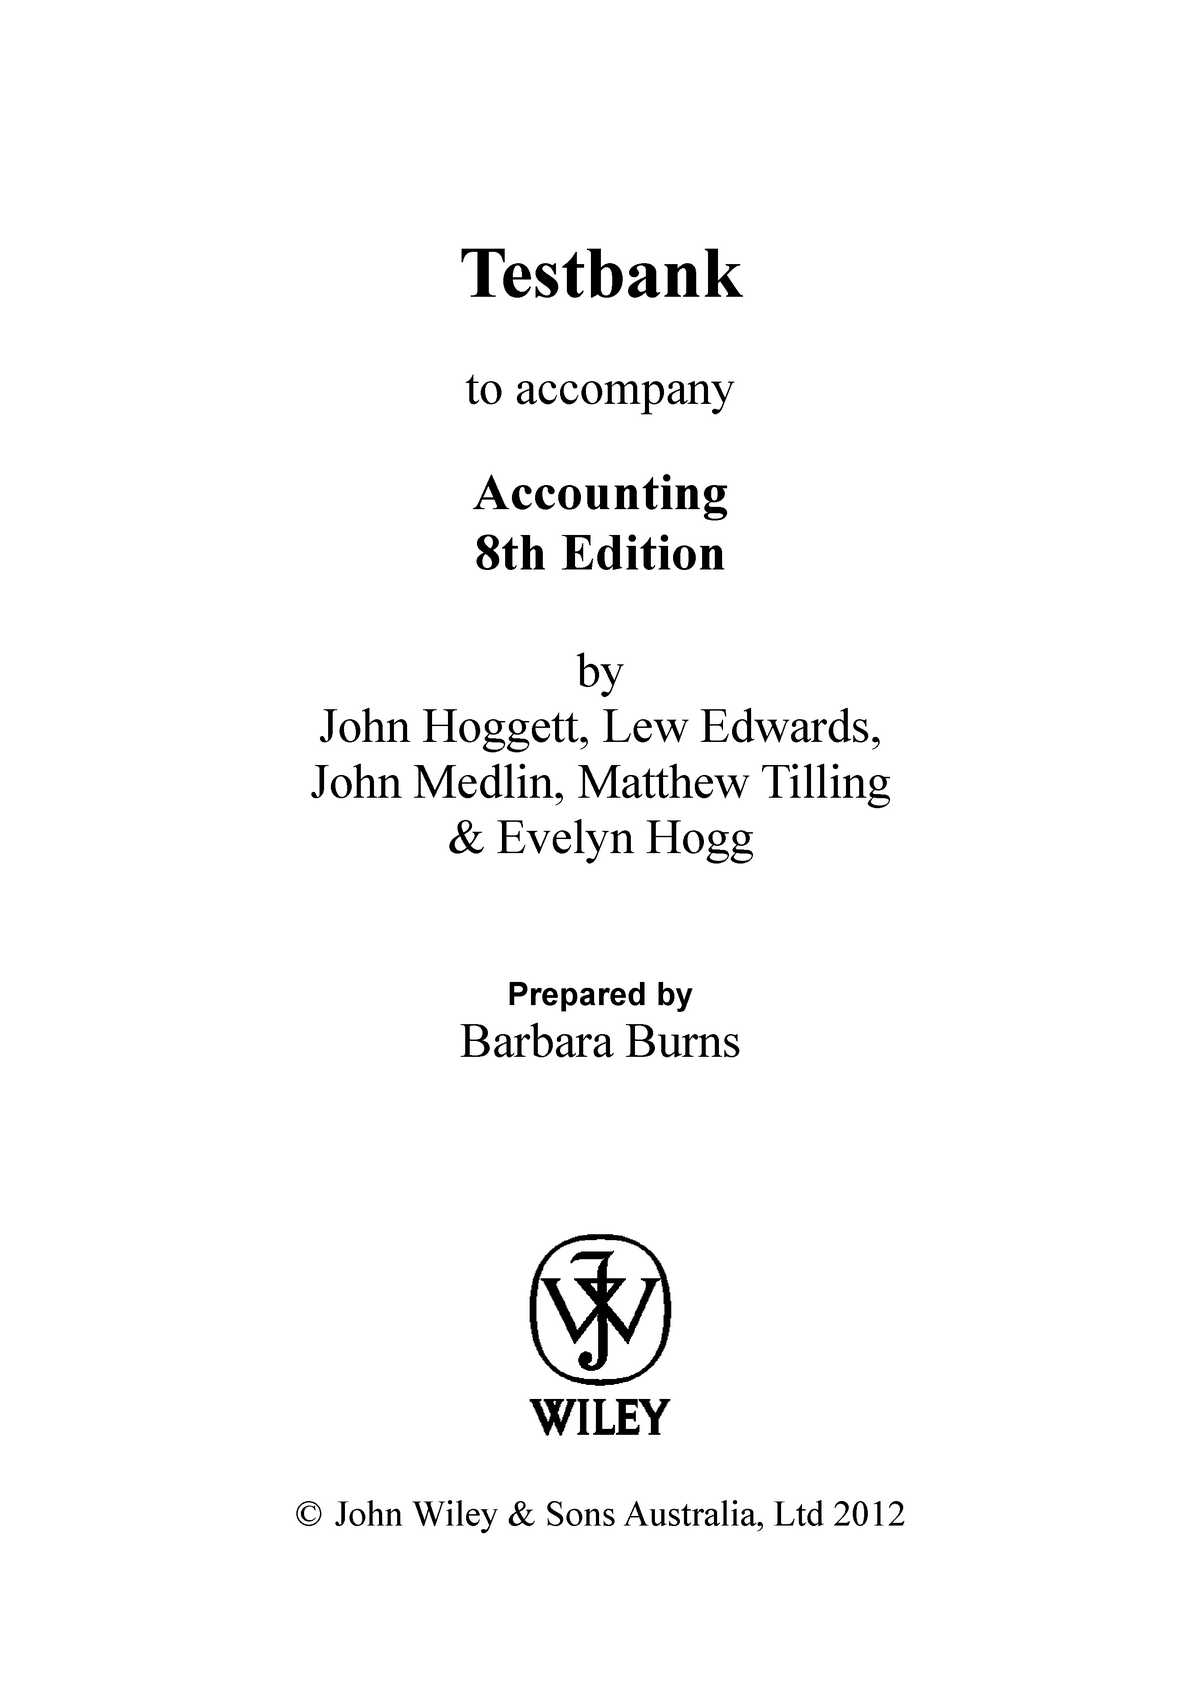 Chapter 4 review Testbank to Accounting 8th Edition by John